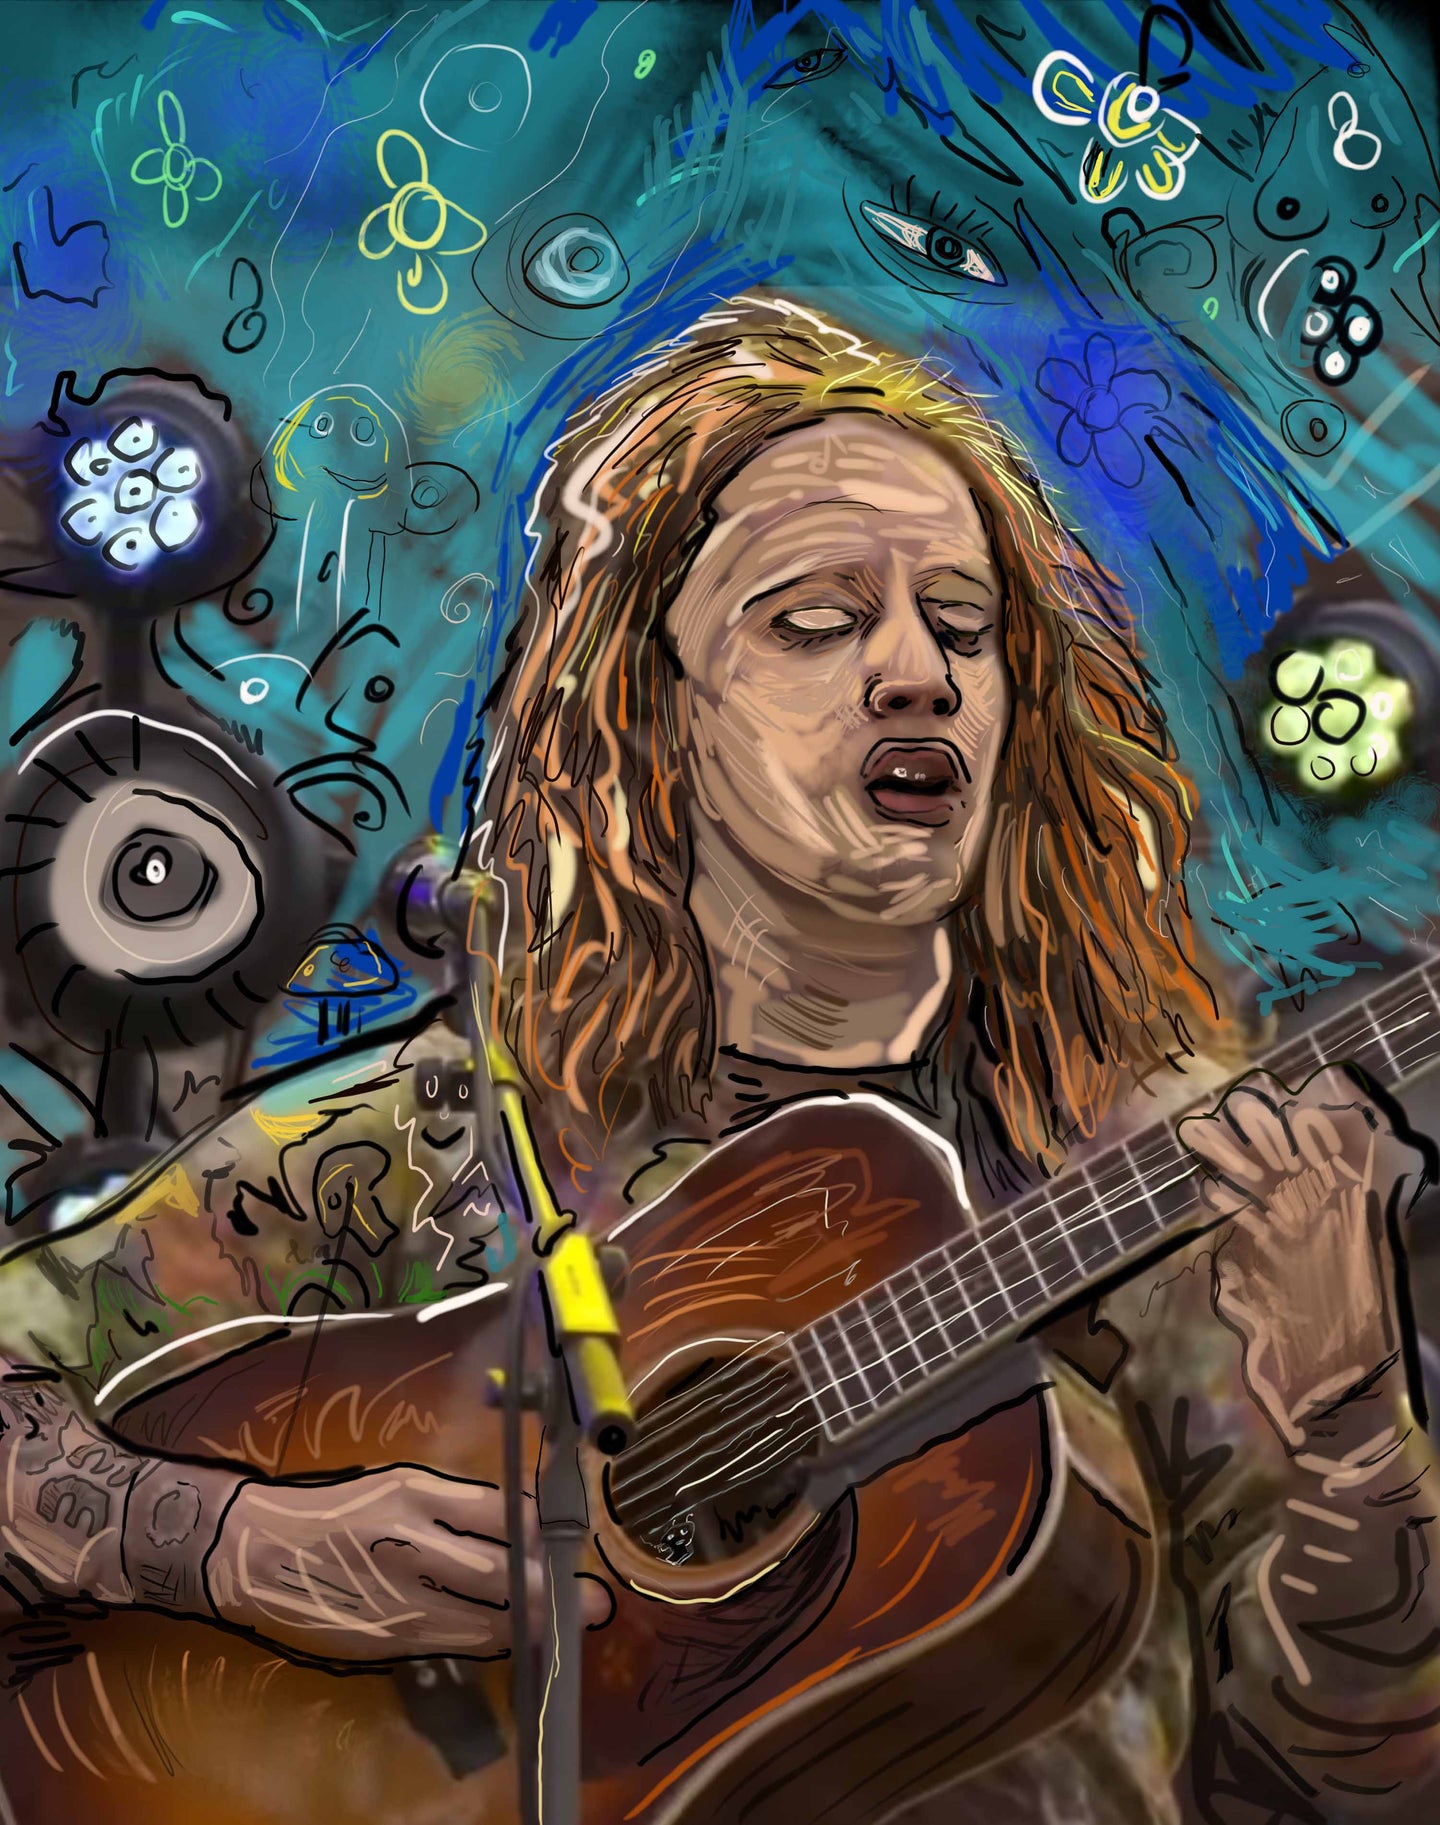 Tribute to Billy Strings prints available